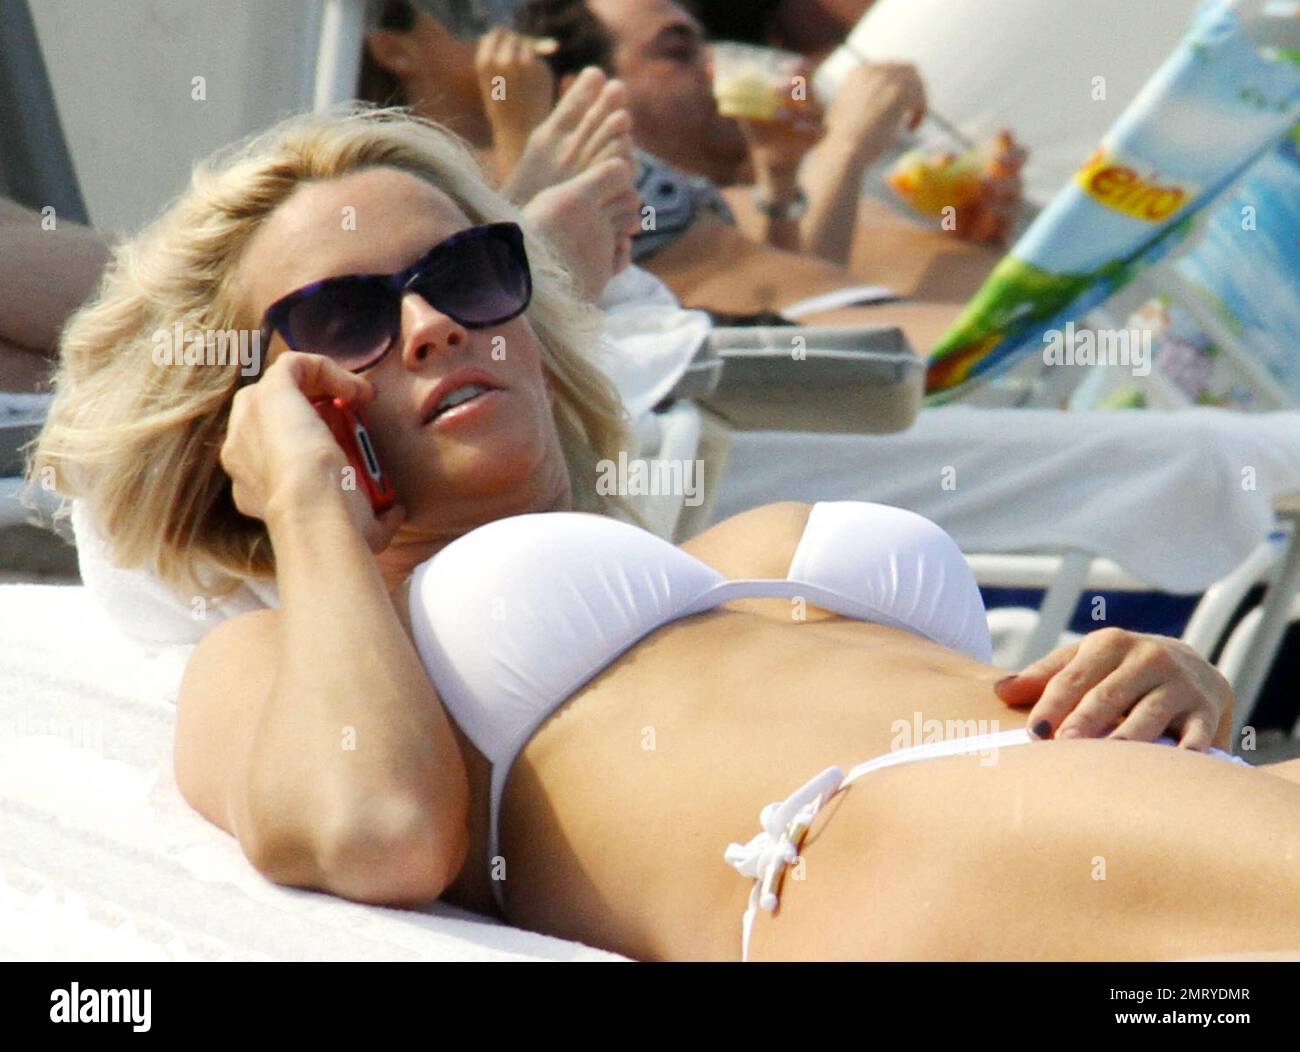 EXCLUSIVE!! Jenny McCarthy and her sister JoJo McCarthy spend some sibling  bonding time on the beach in Bikinis. Jenny showed off her incredible  figure in an all white bikini as she lounged